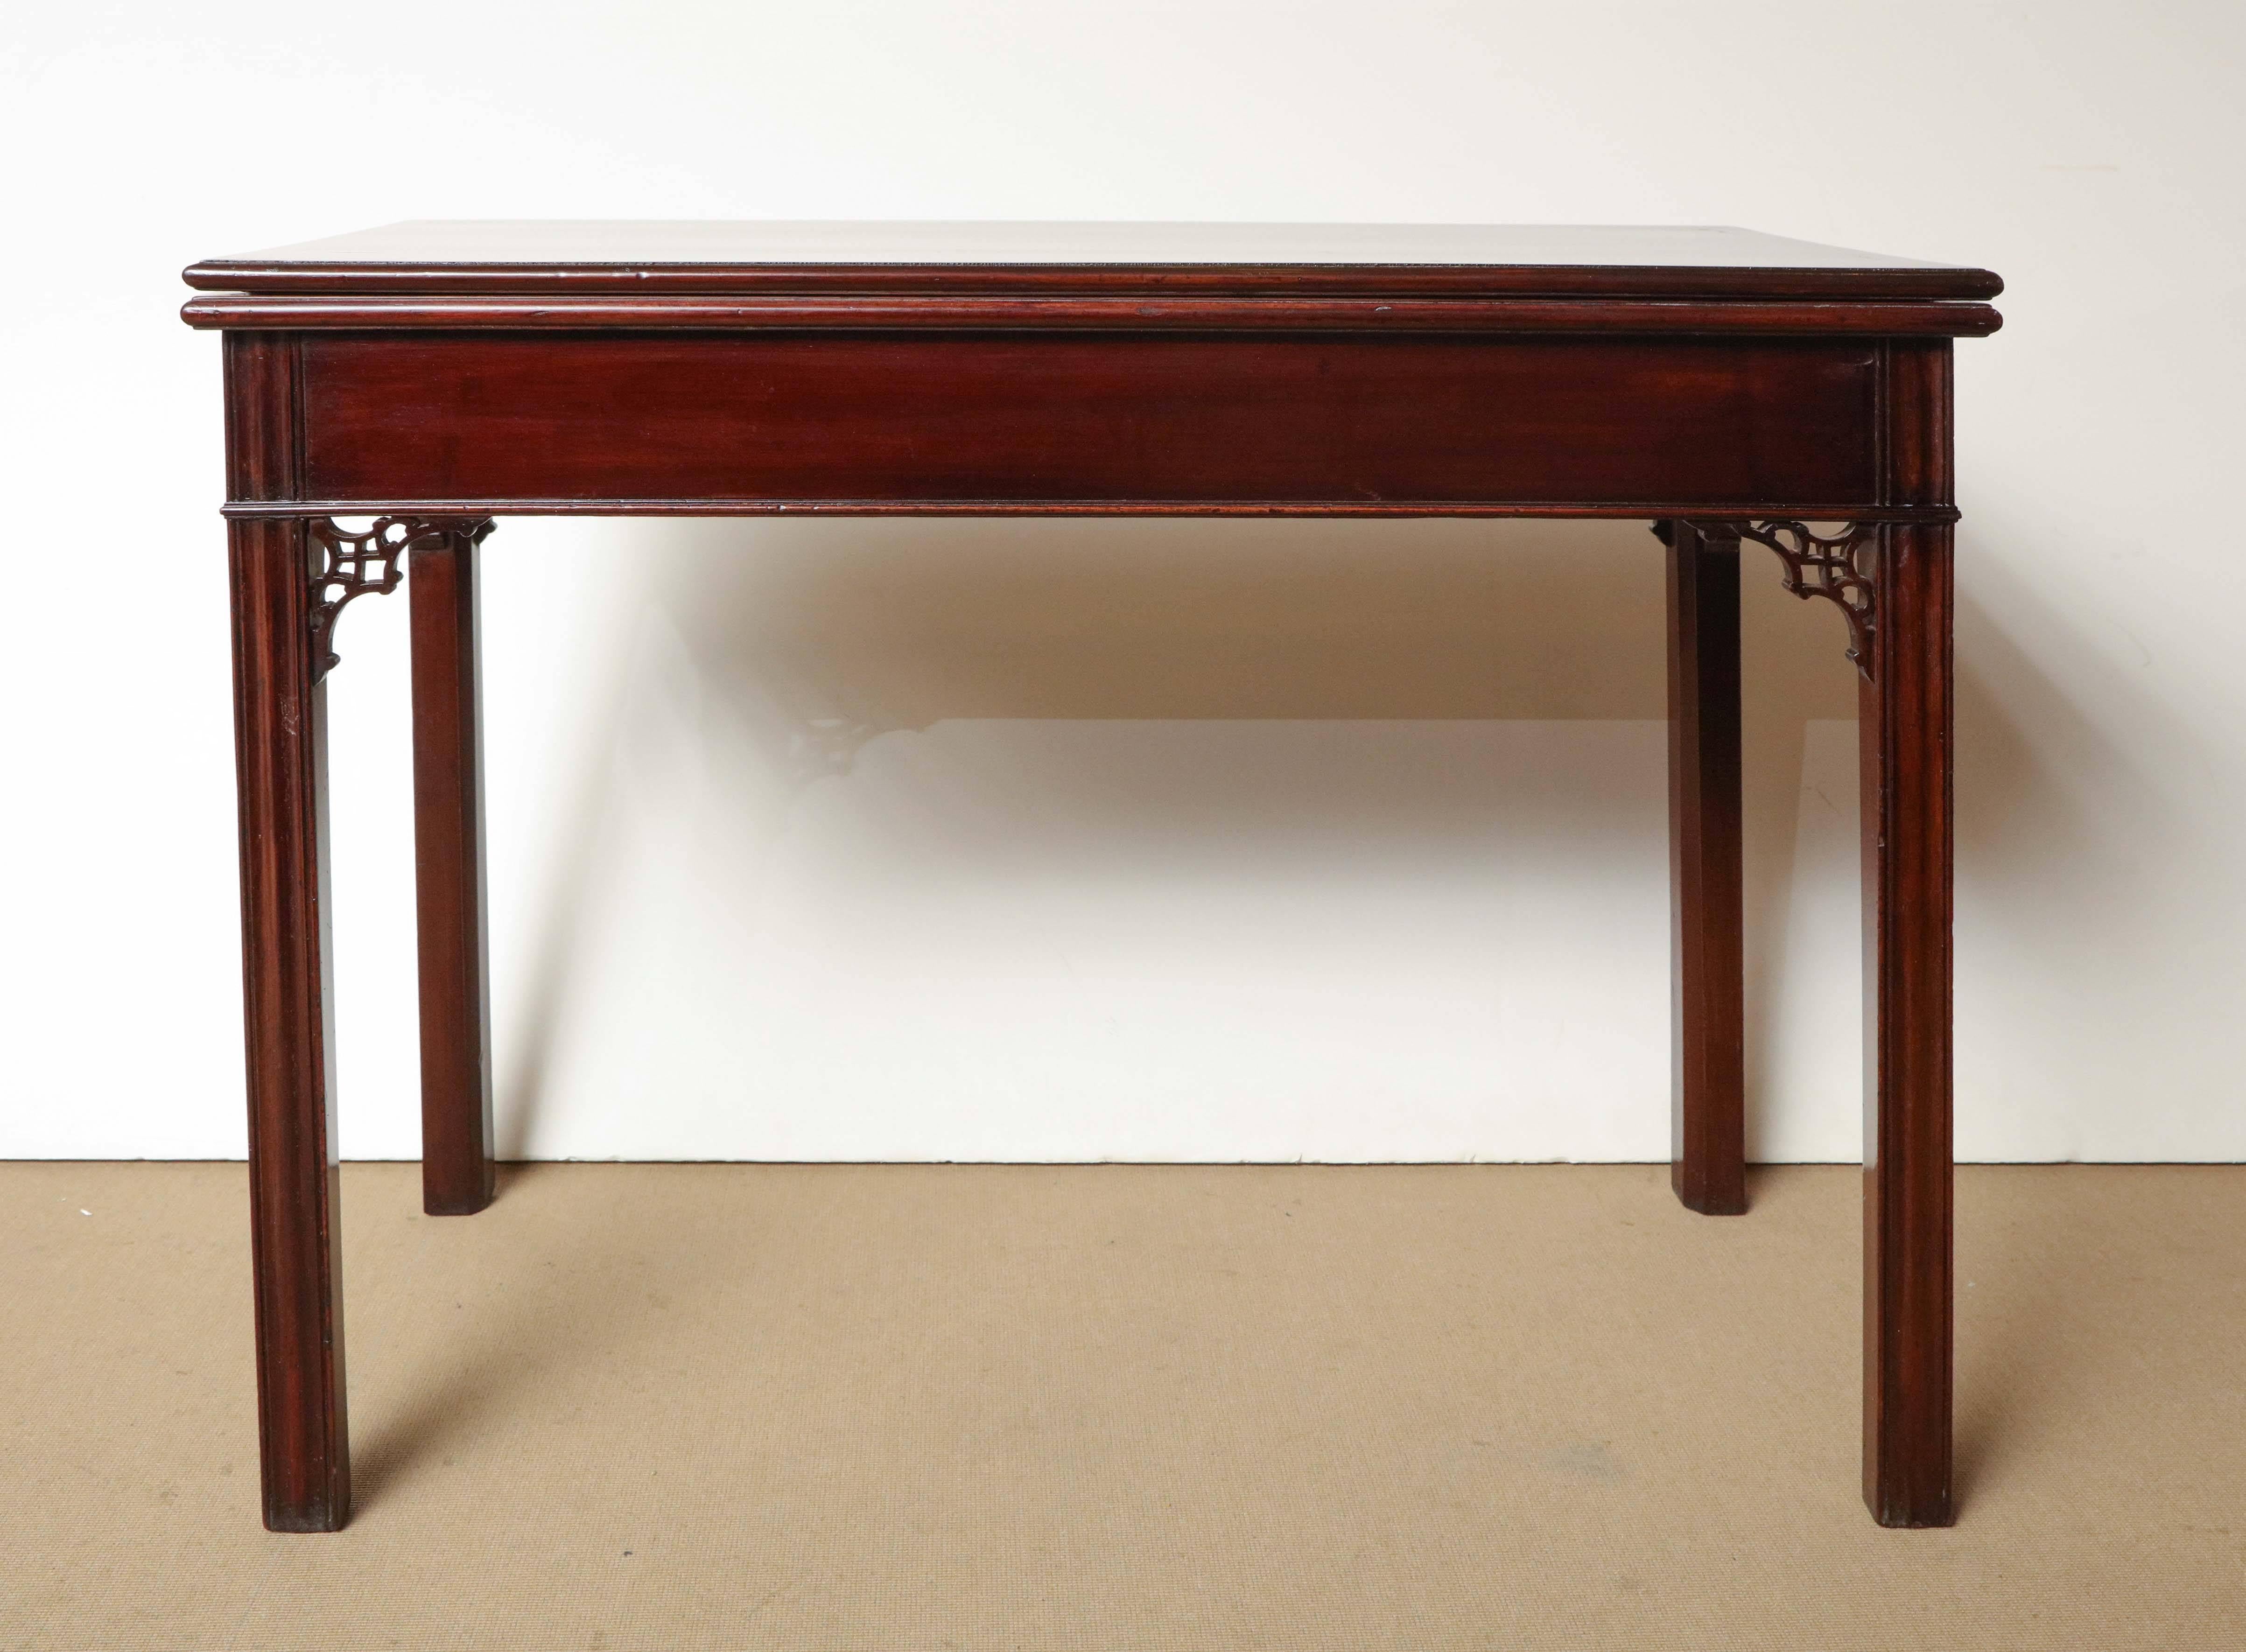 Mahogany Early 19th Century English Games Table in the Chippendale Taste